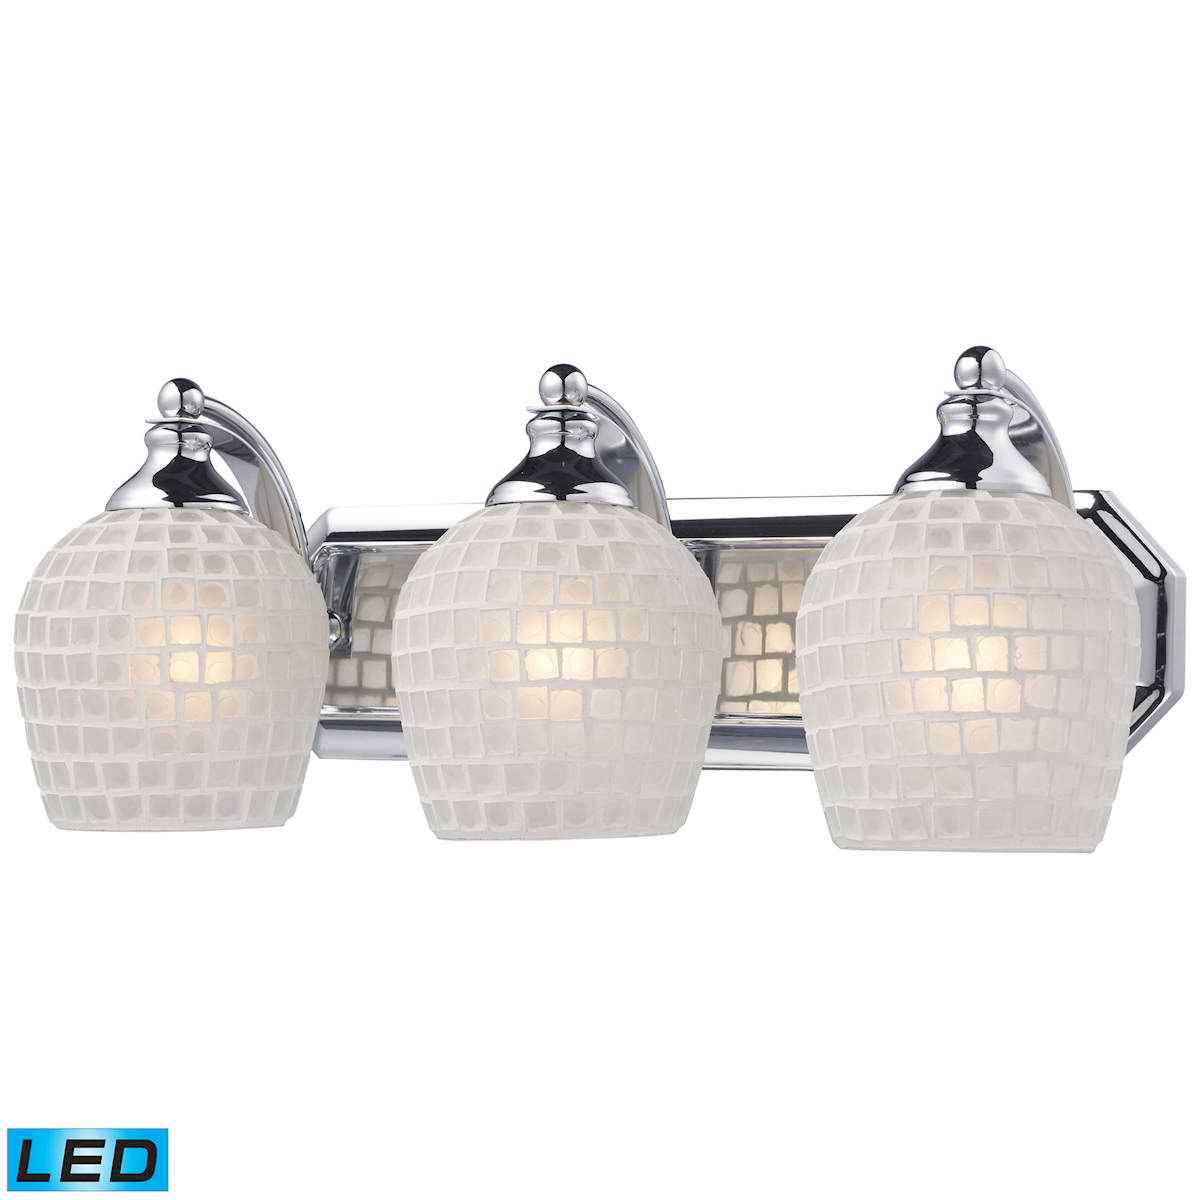 3 Light Vanity in Polished Chrome and White Mosaic Glass - LED, 800 Lumens (2400 Lumens Total) With Full Scale